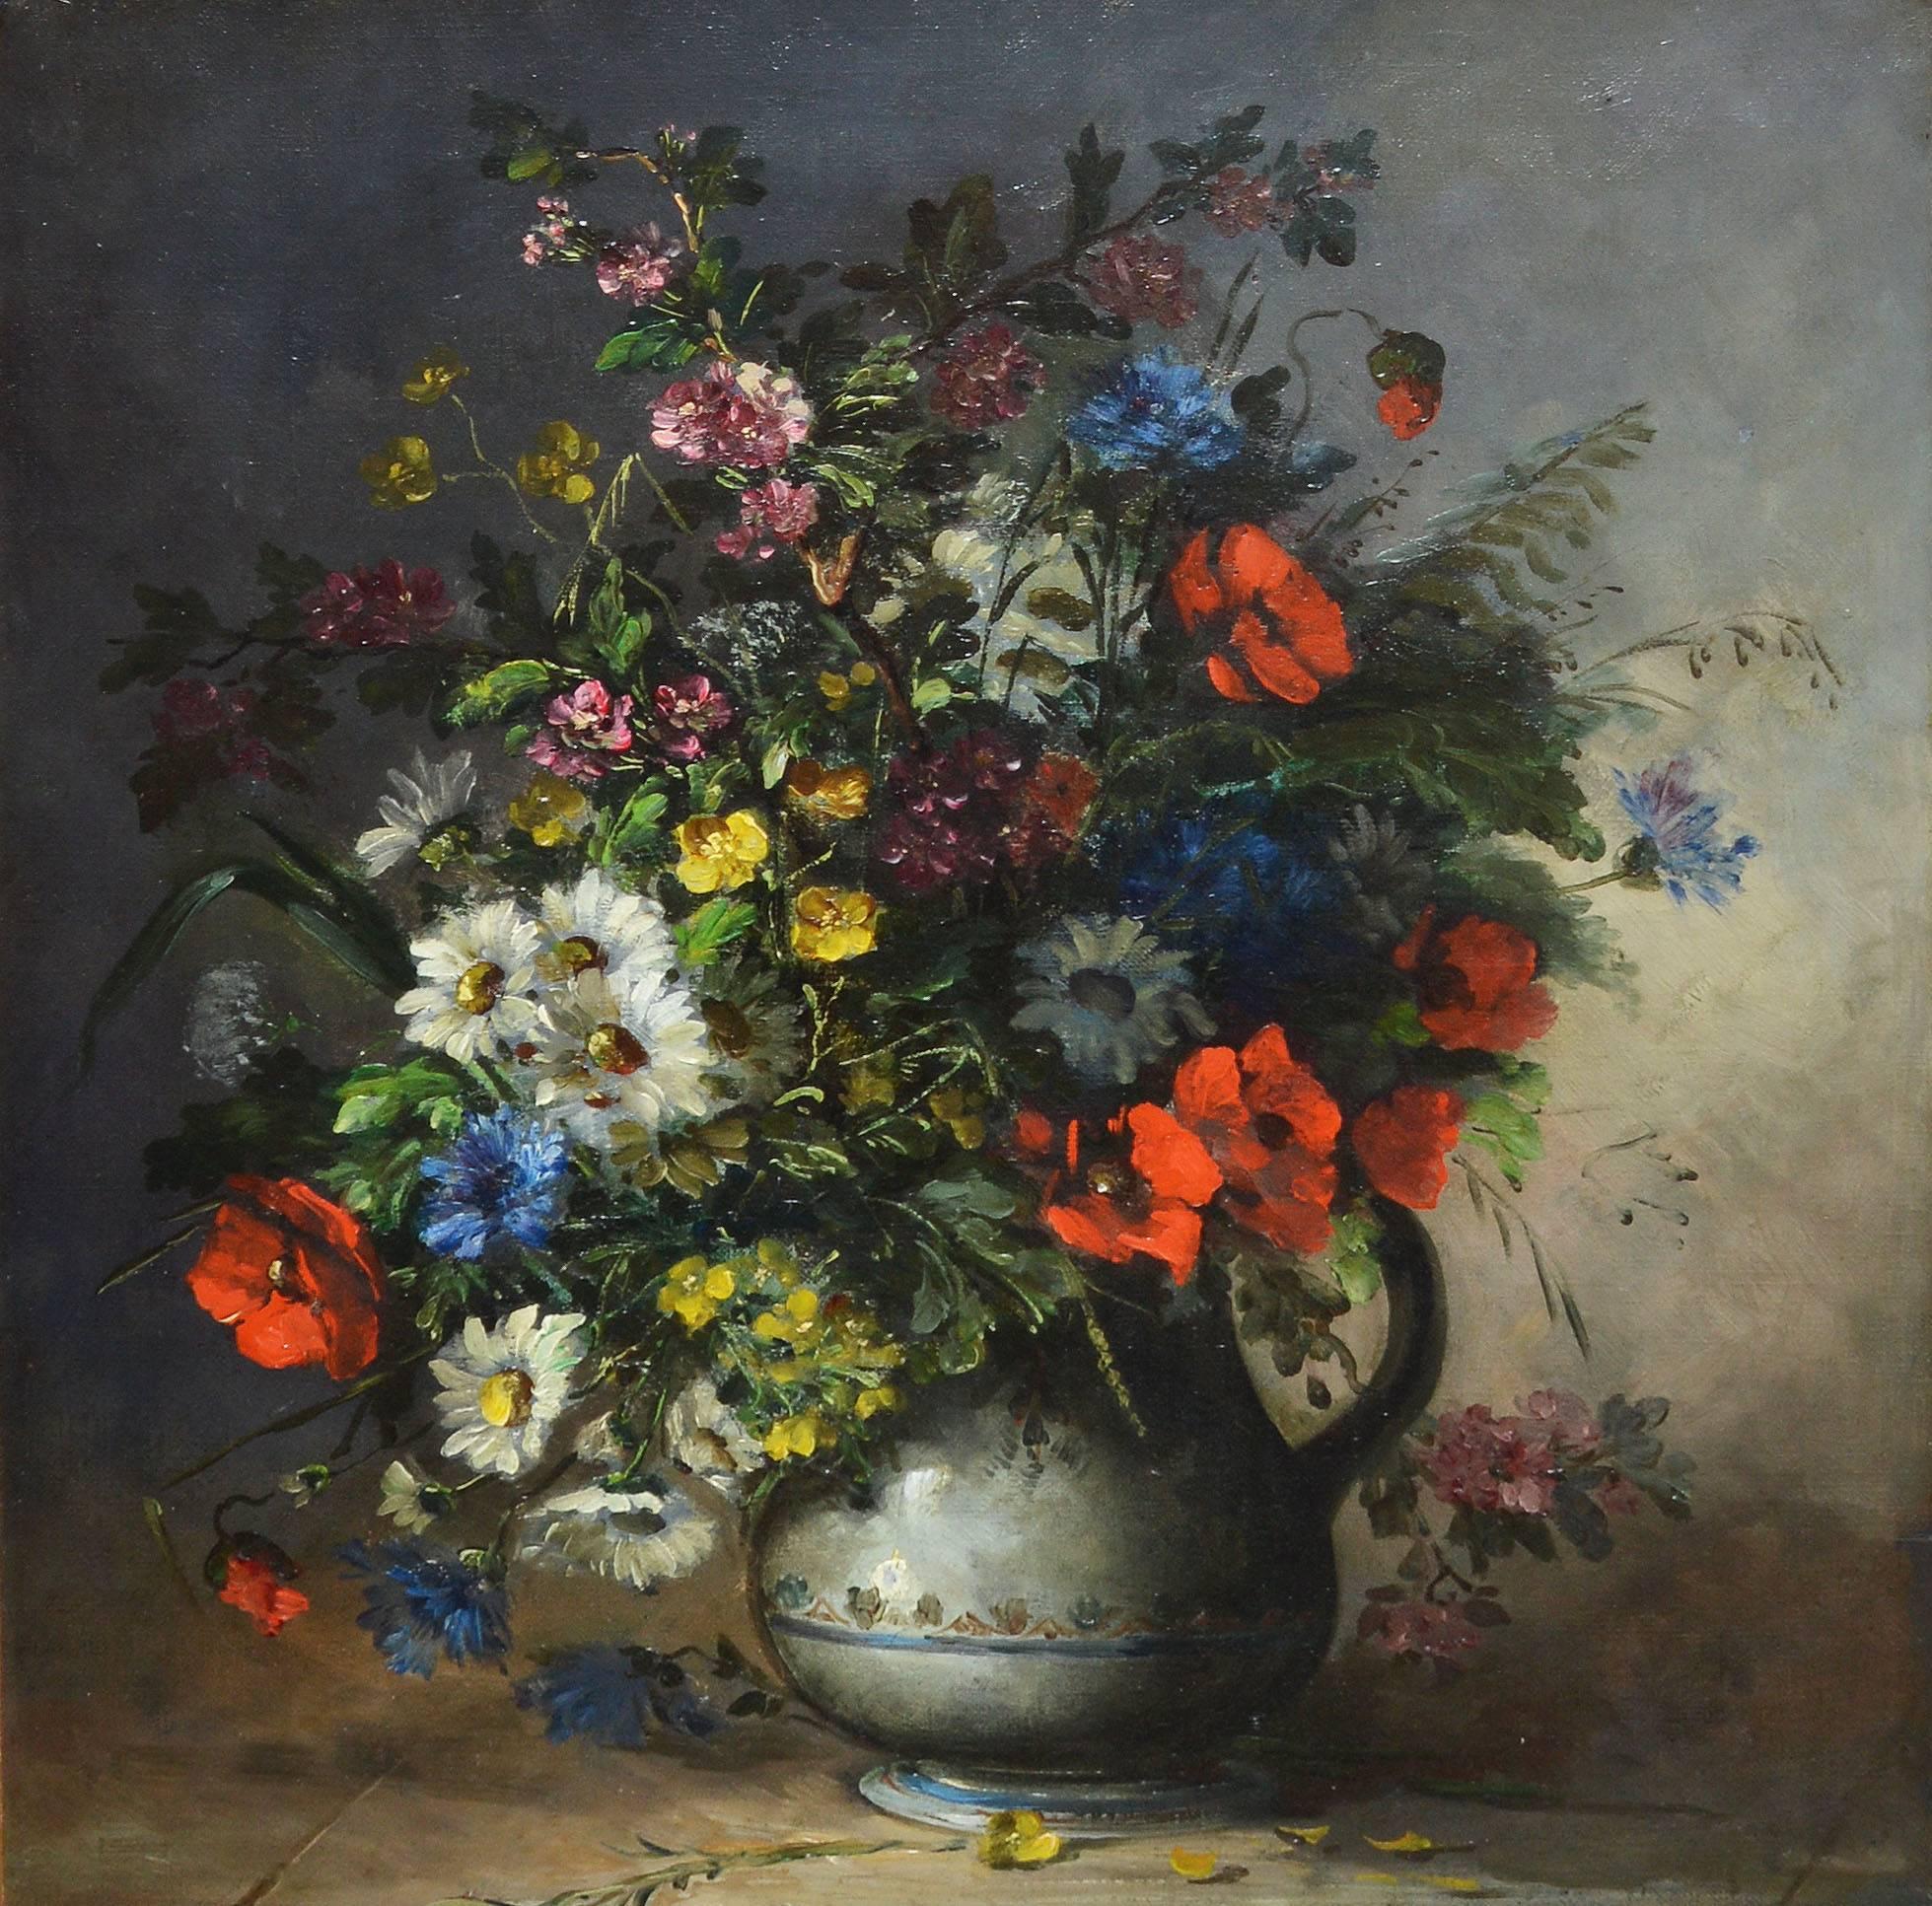 Antique realist still life painting of flowers by Eugene Henri Cauchois (1850-1911).  Oil on canvas, circa 1900.  Signed lower right, "H. Cauchois".  Displayed in a giltwood frame.  Image size, 20"L x 24"H, overall 28"L x